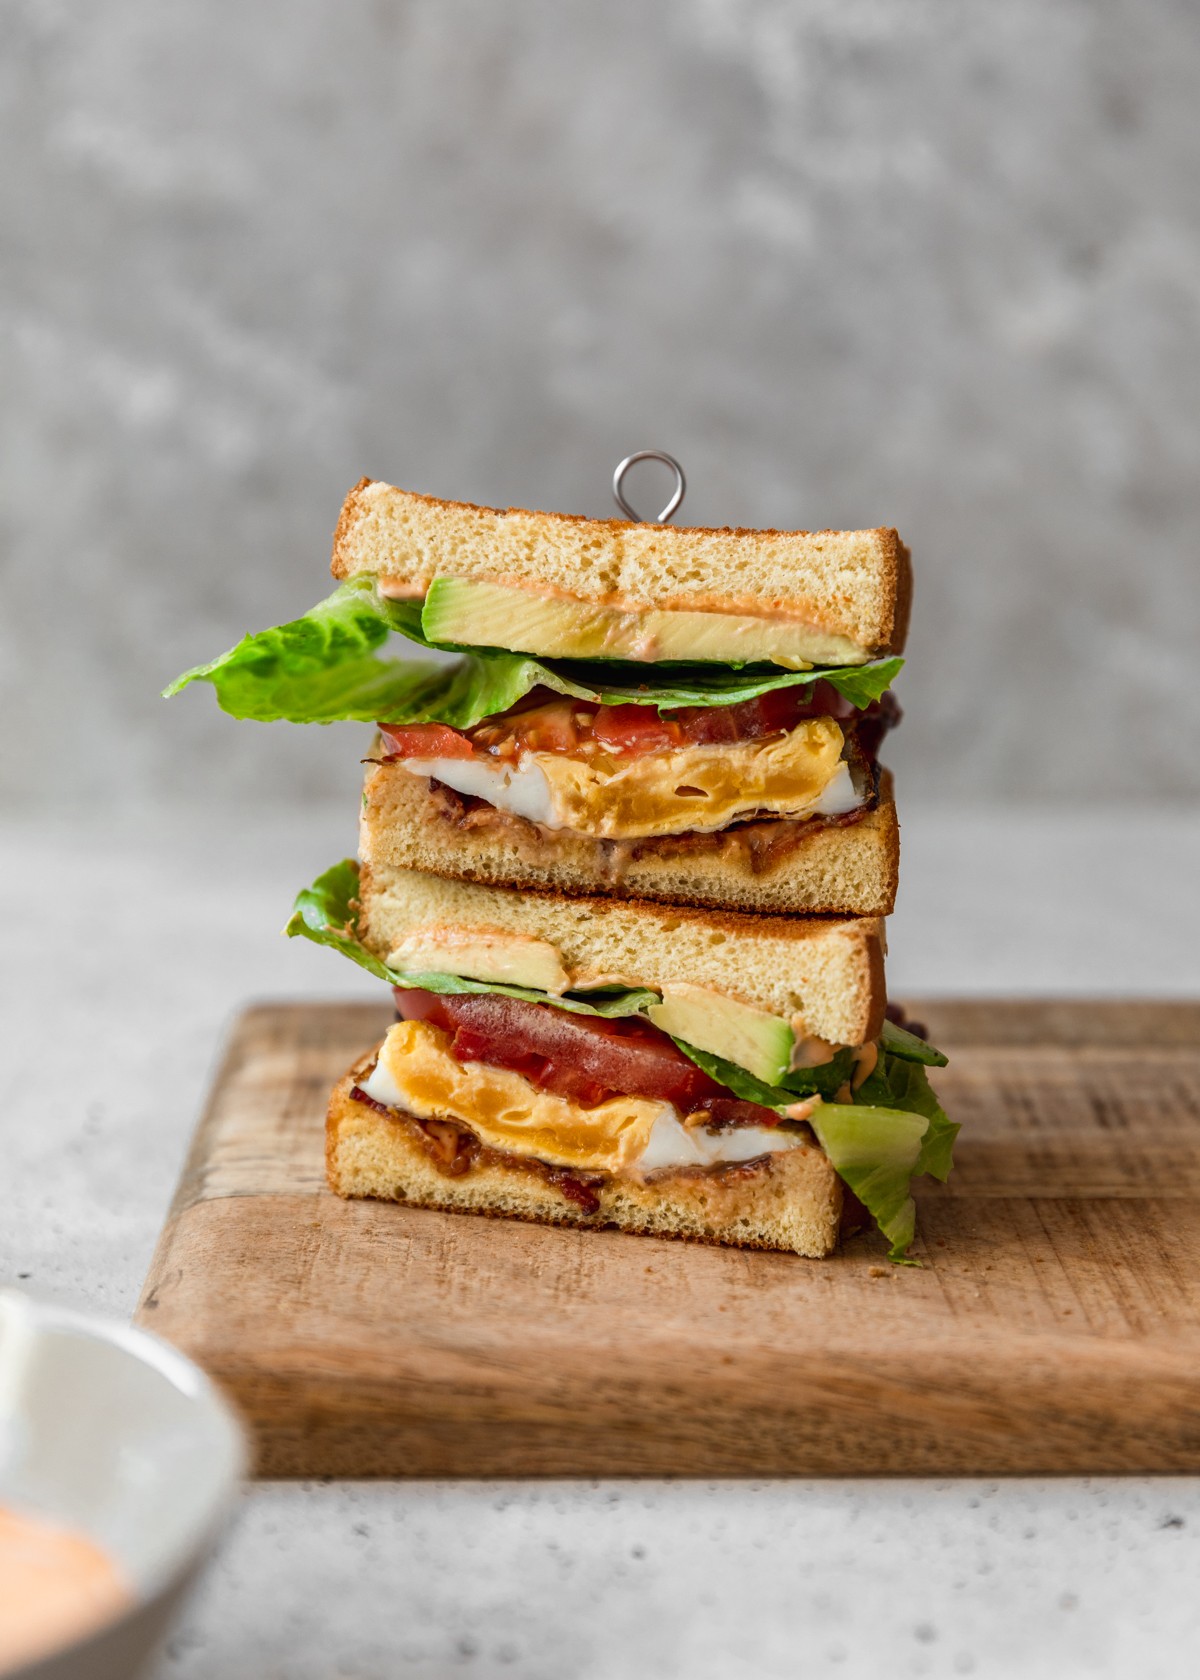 A side image of two breakfast BLT halves stacked on a wood board with a grey background.